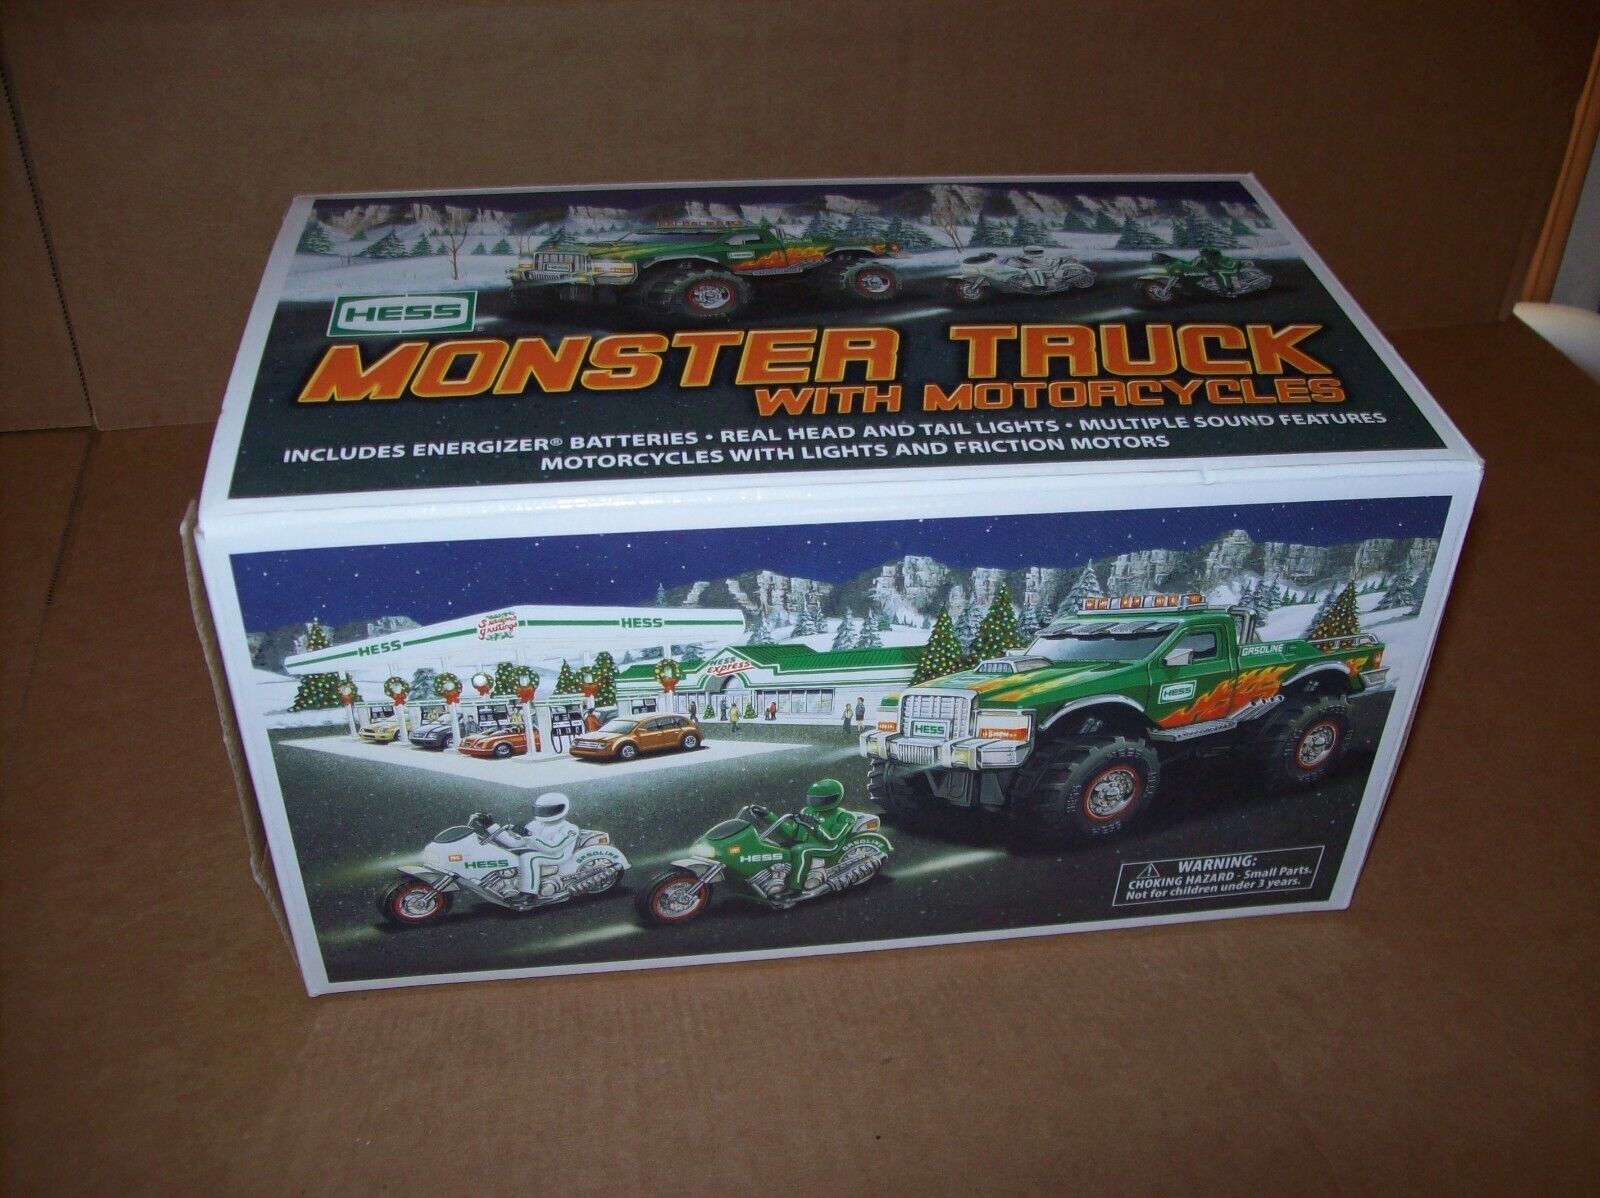 Vintage 2007 Hess Toy Monster Truck with Motorcycles NEW open box